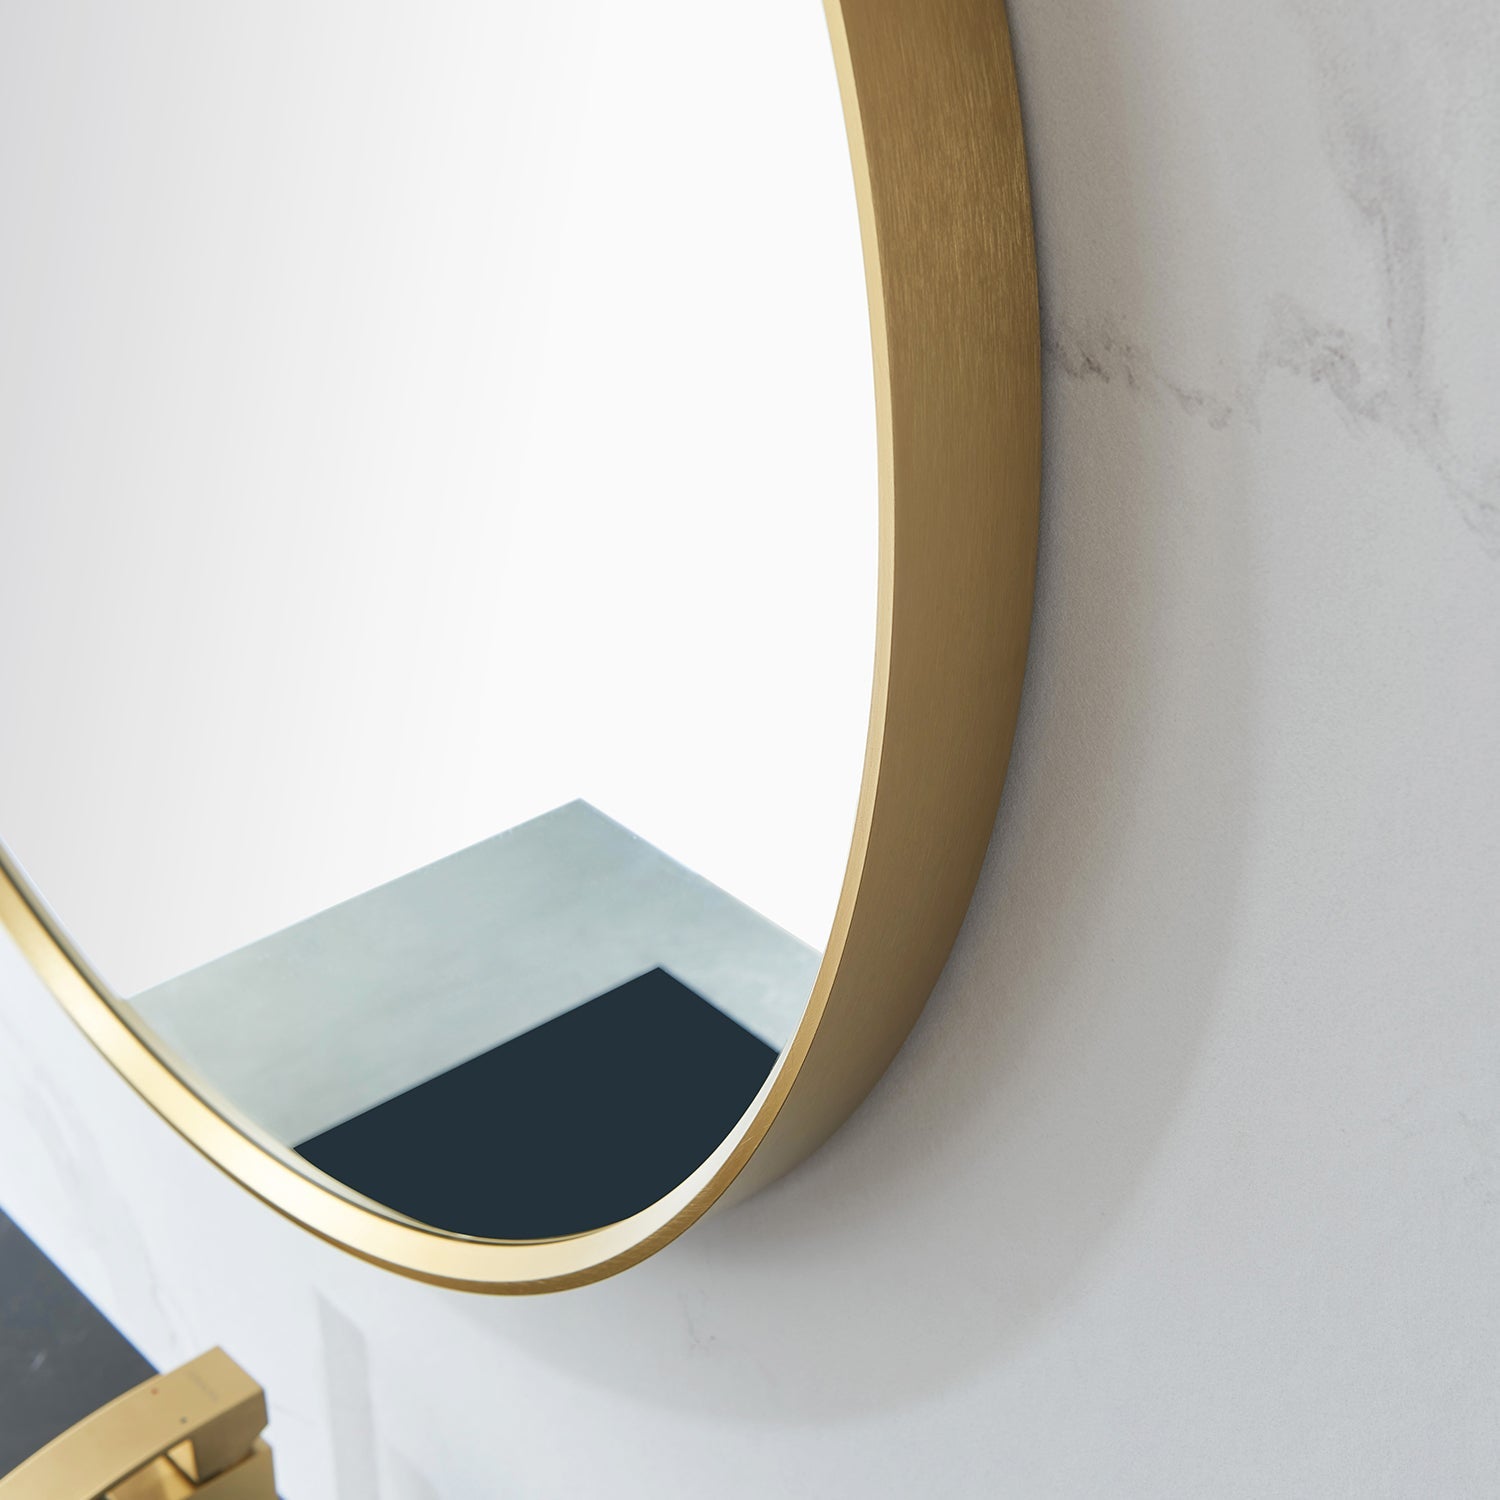 Vinnova Design Cascante 35.4 in. W x 35.4 in. H Round Metal Wall Mirror in Brushed Gold - New Star Living